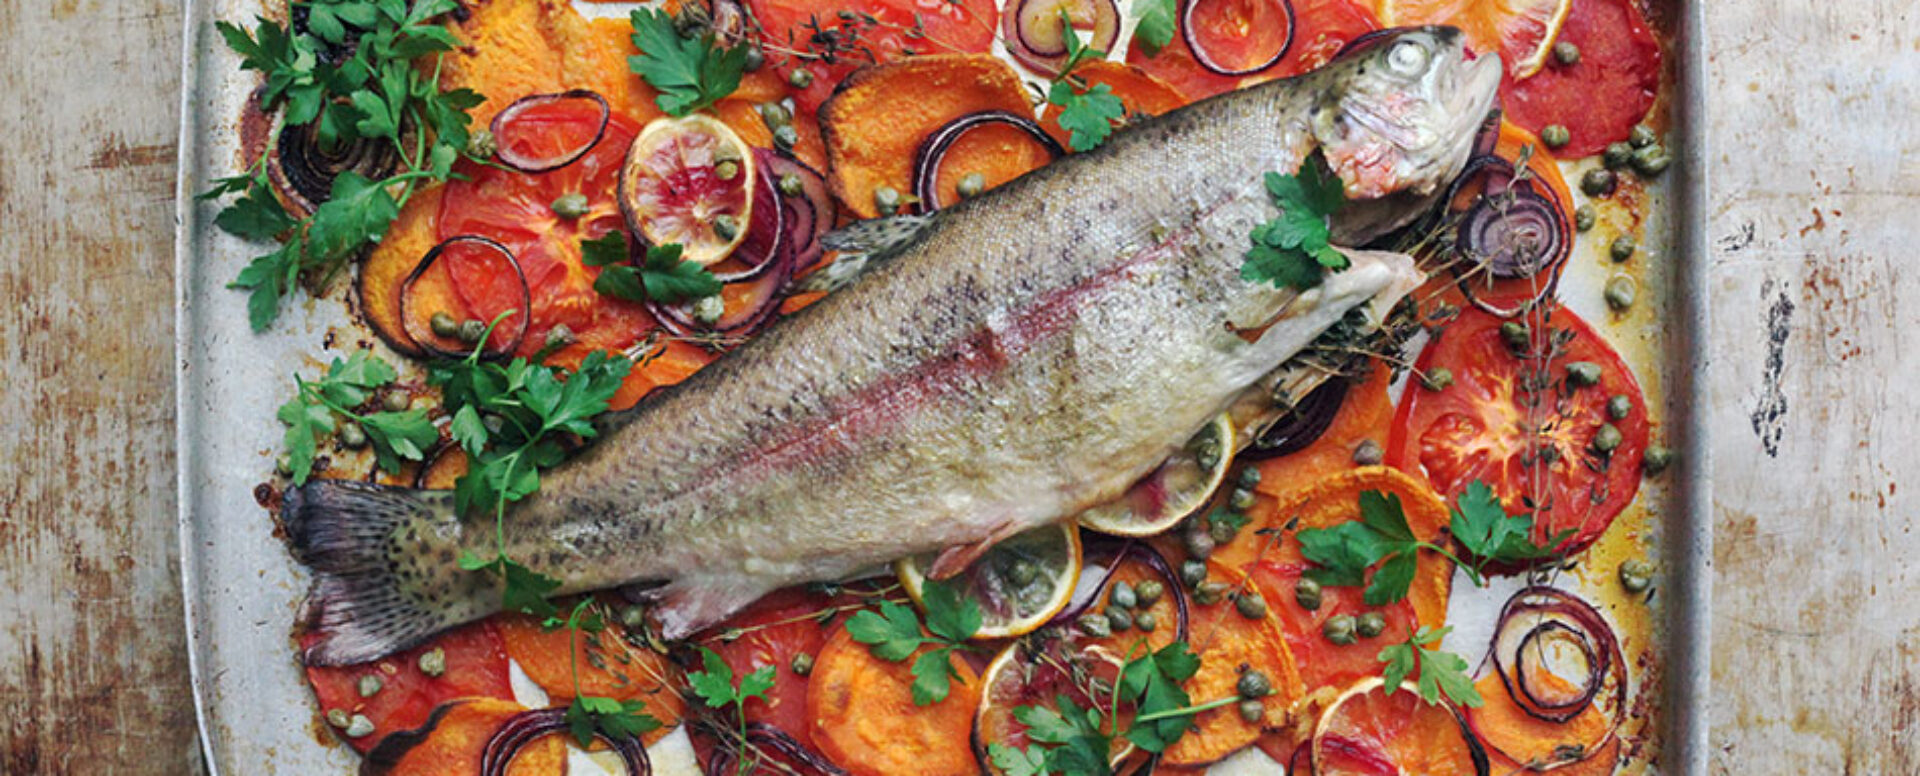 Is oily fish healthy article